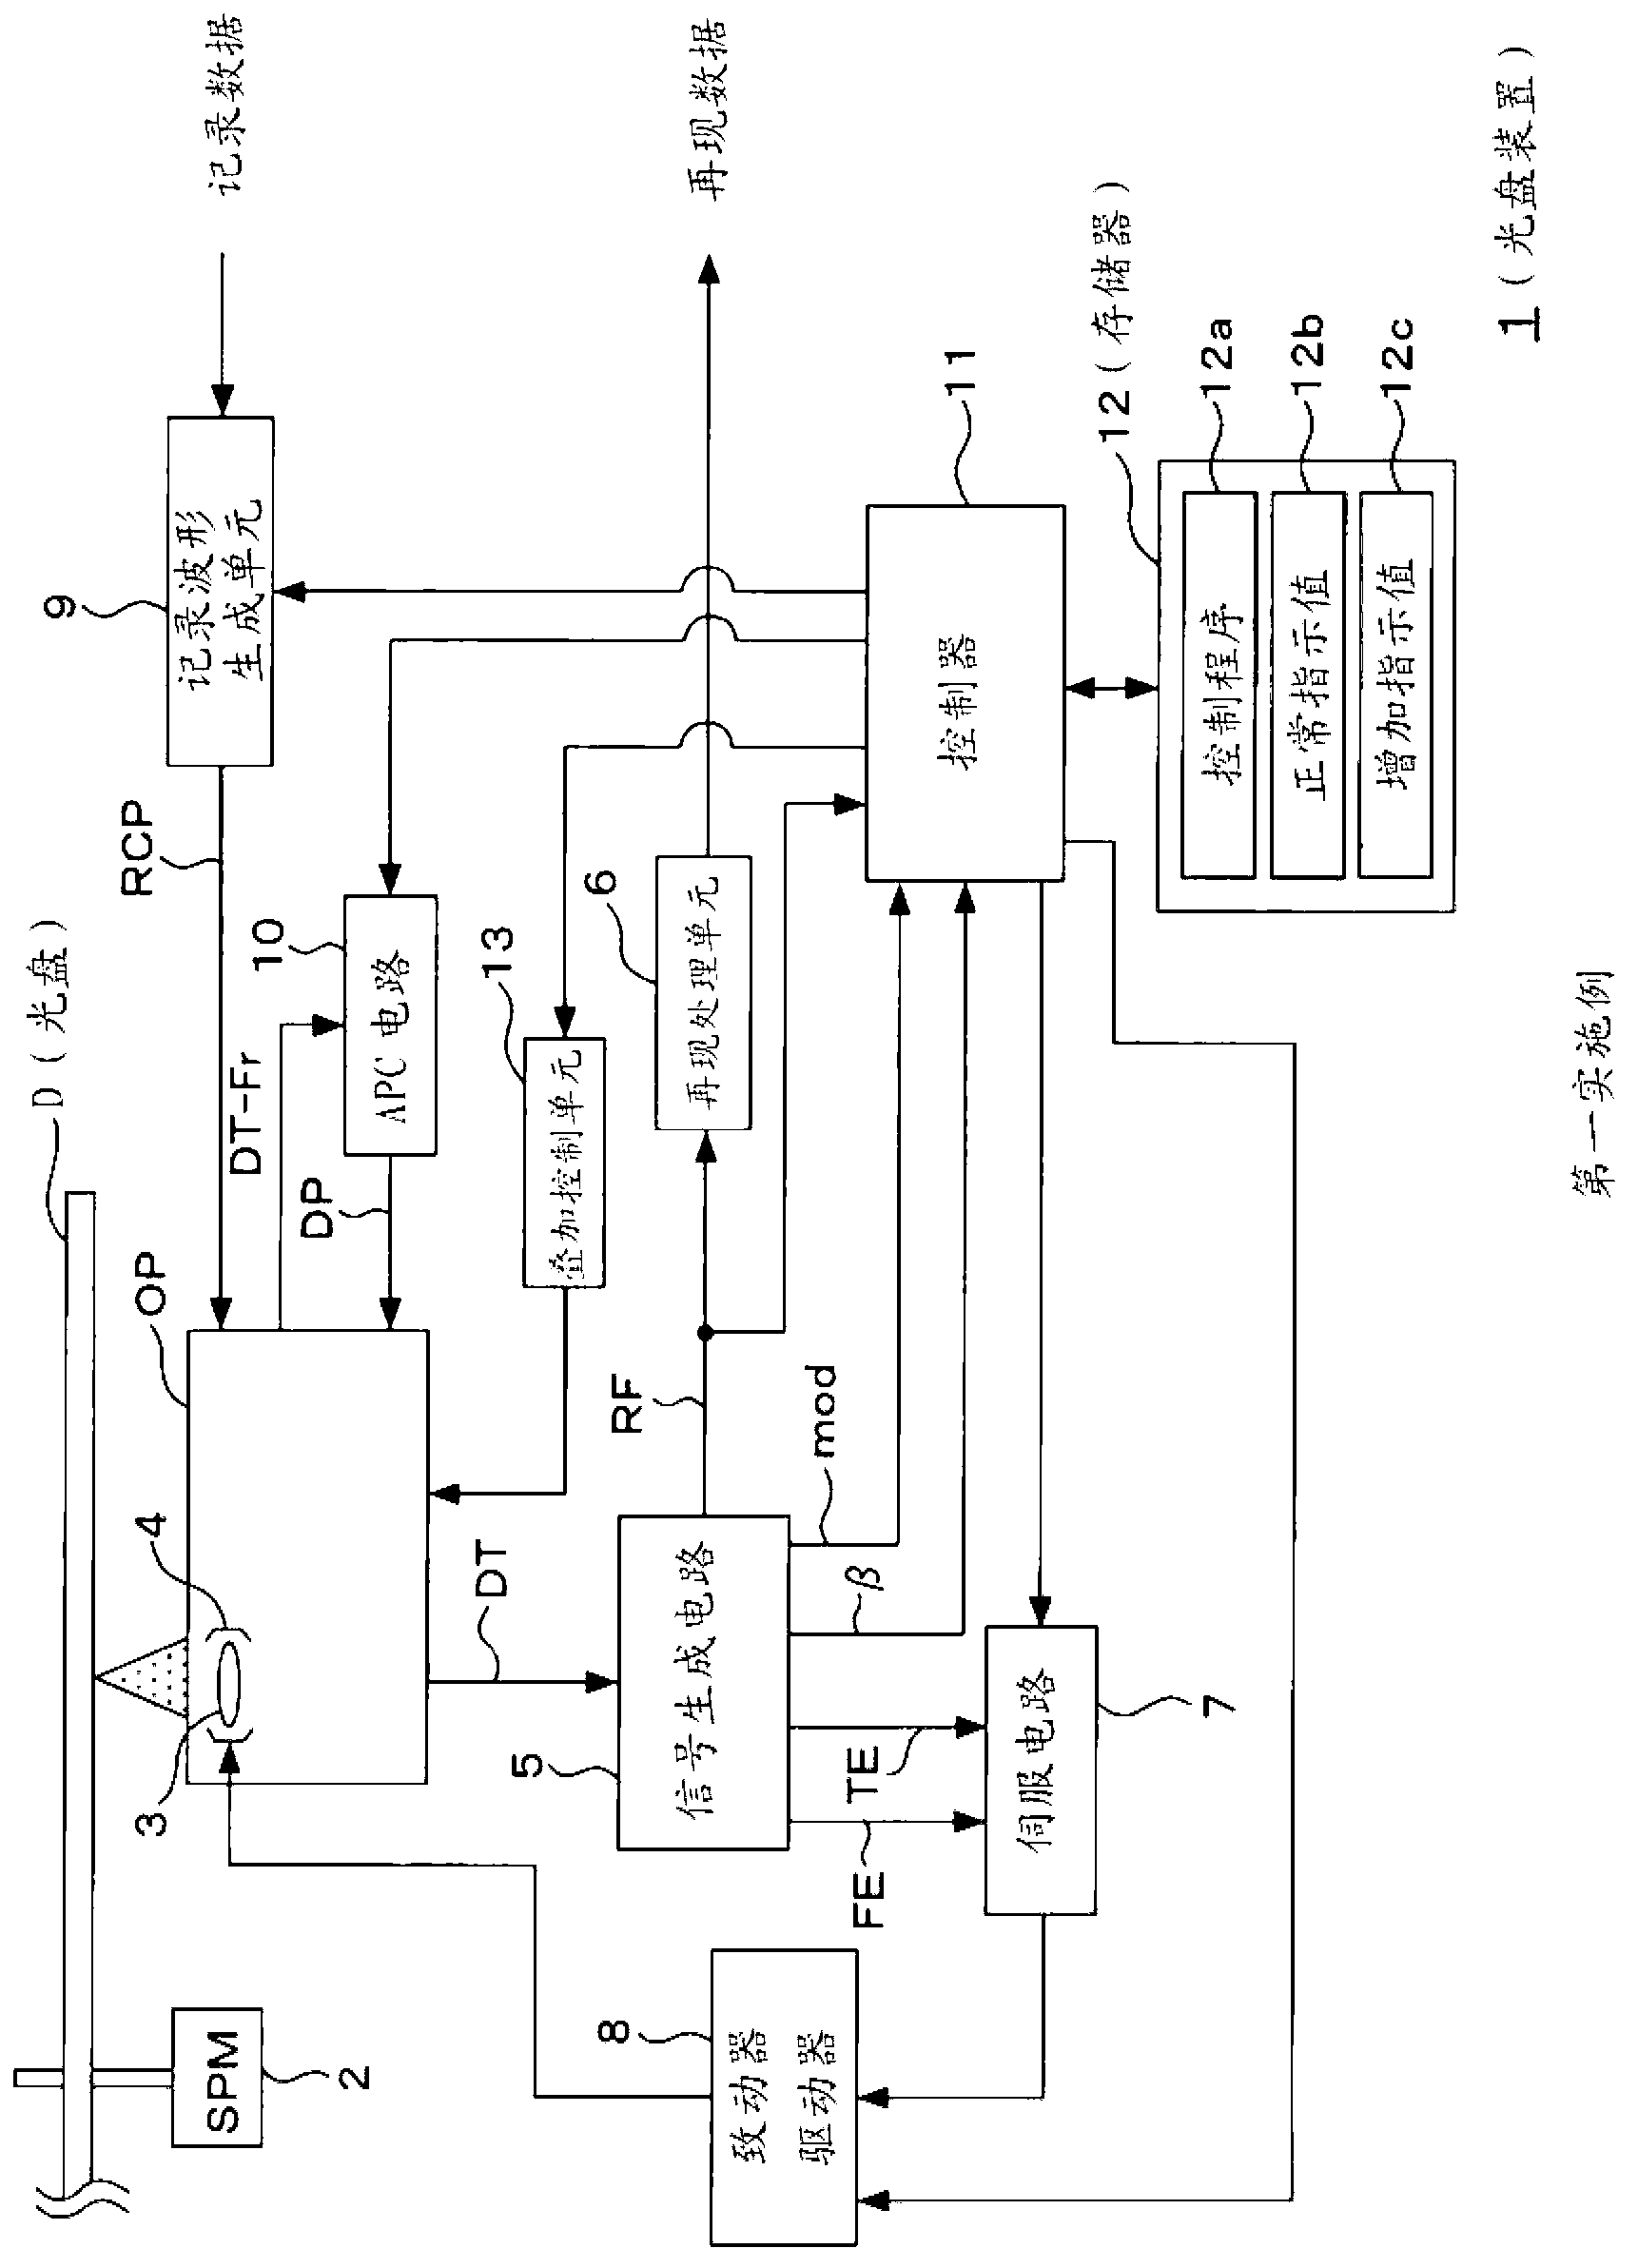 Optical recording medium driving apparatus, high frequency superposition method, and program